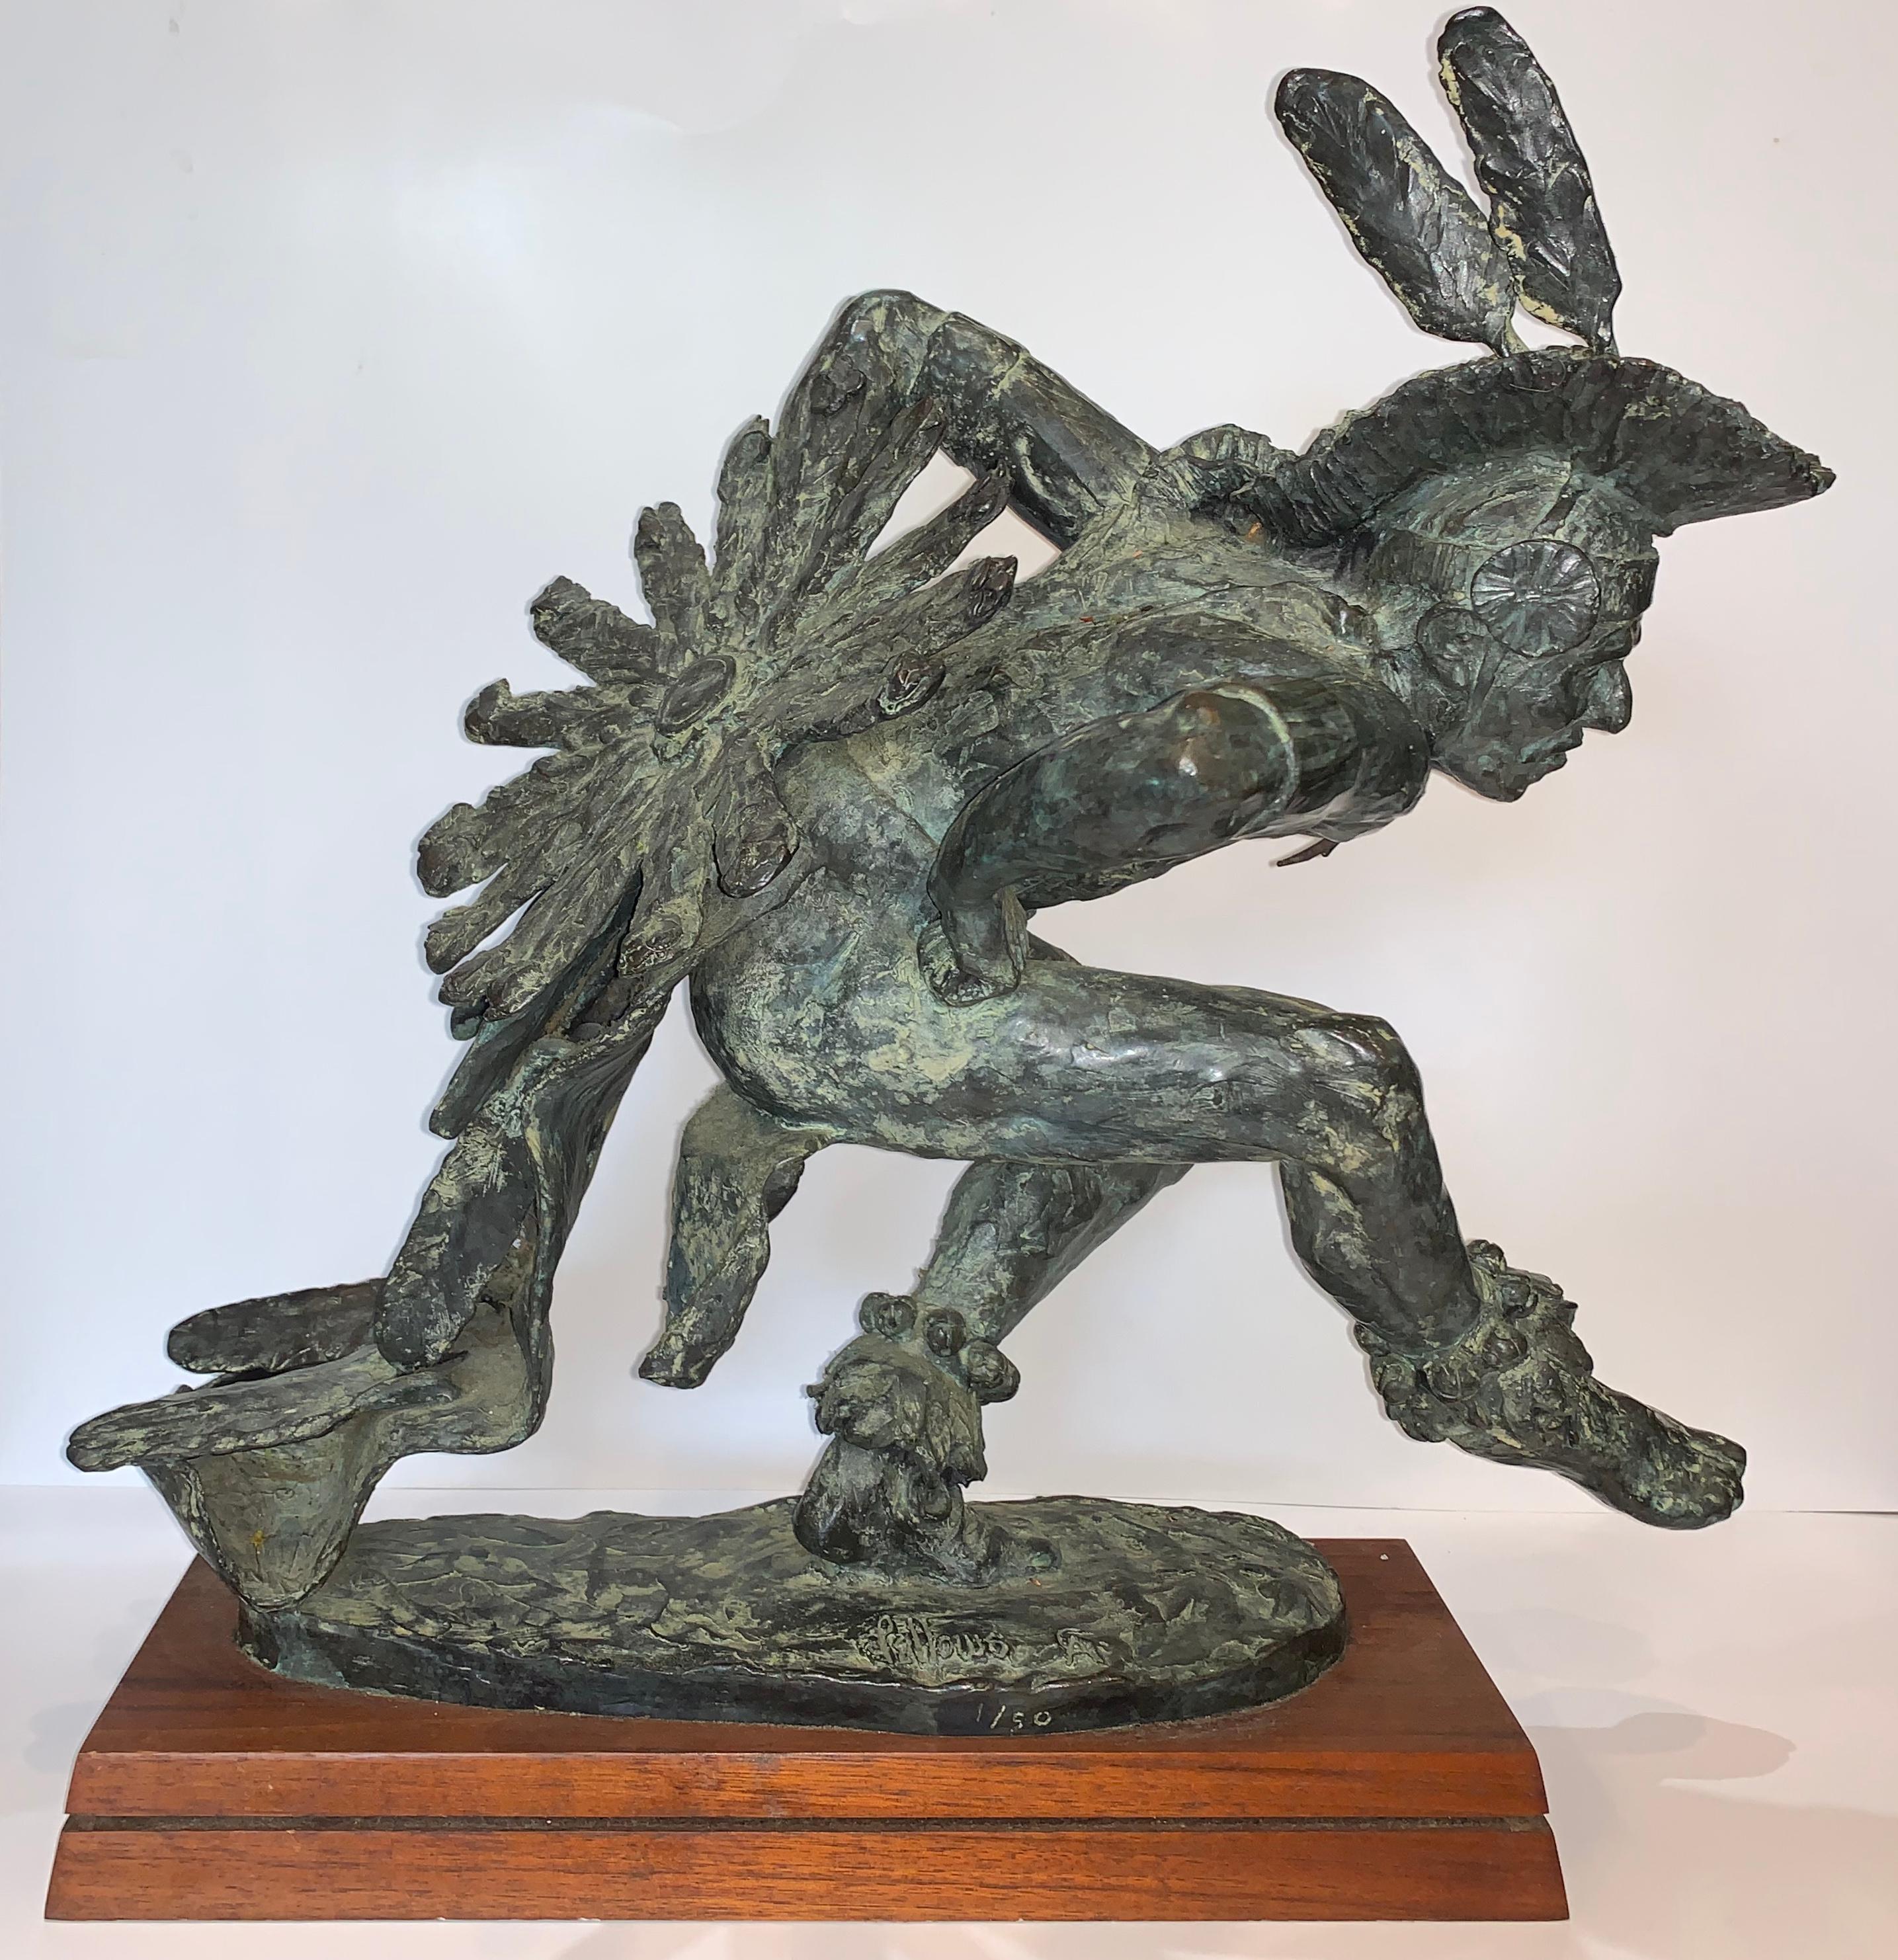 fred fellows - Edition # 1/50 "Dancing Back to Past" American Indian Bronze  Chief Dancer at 1stDibs